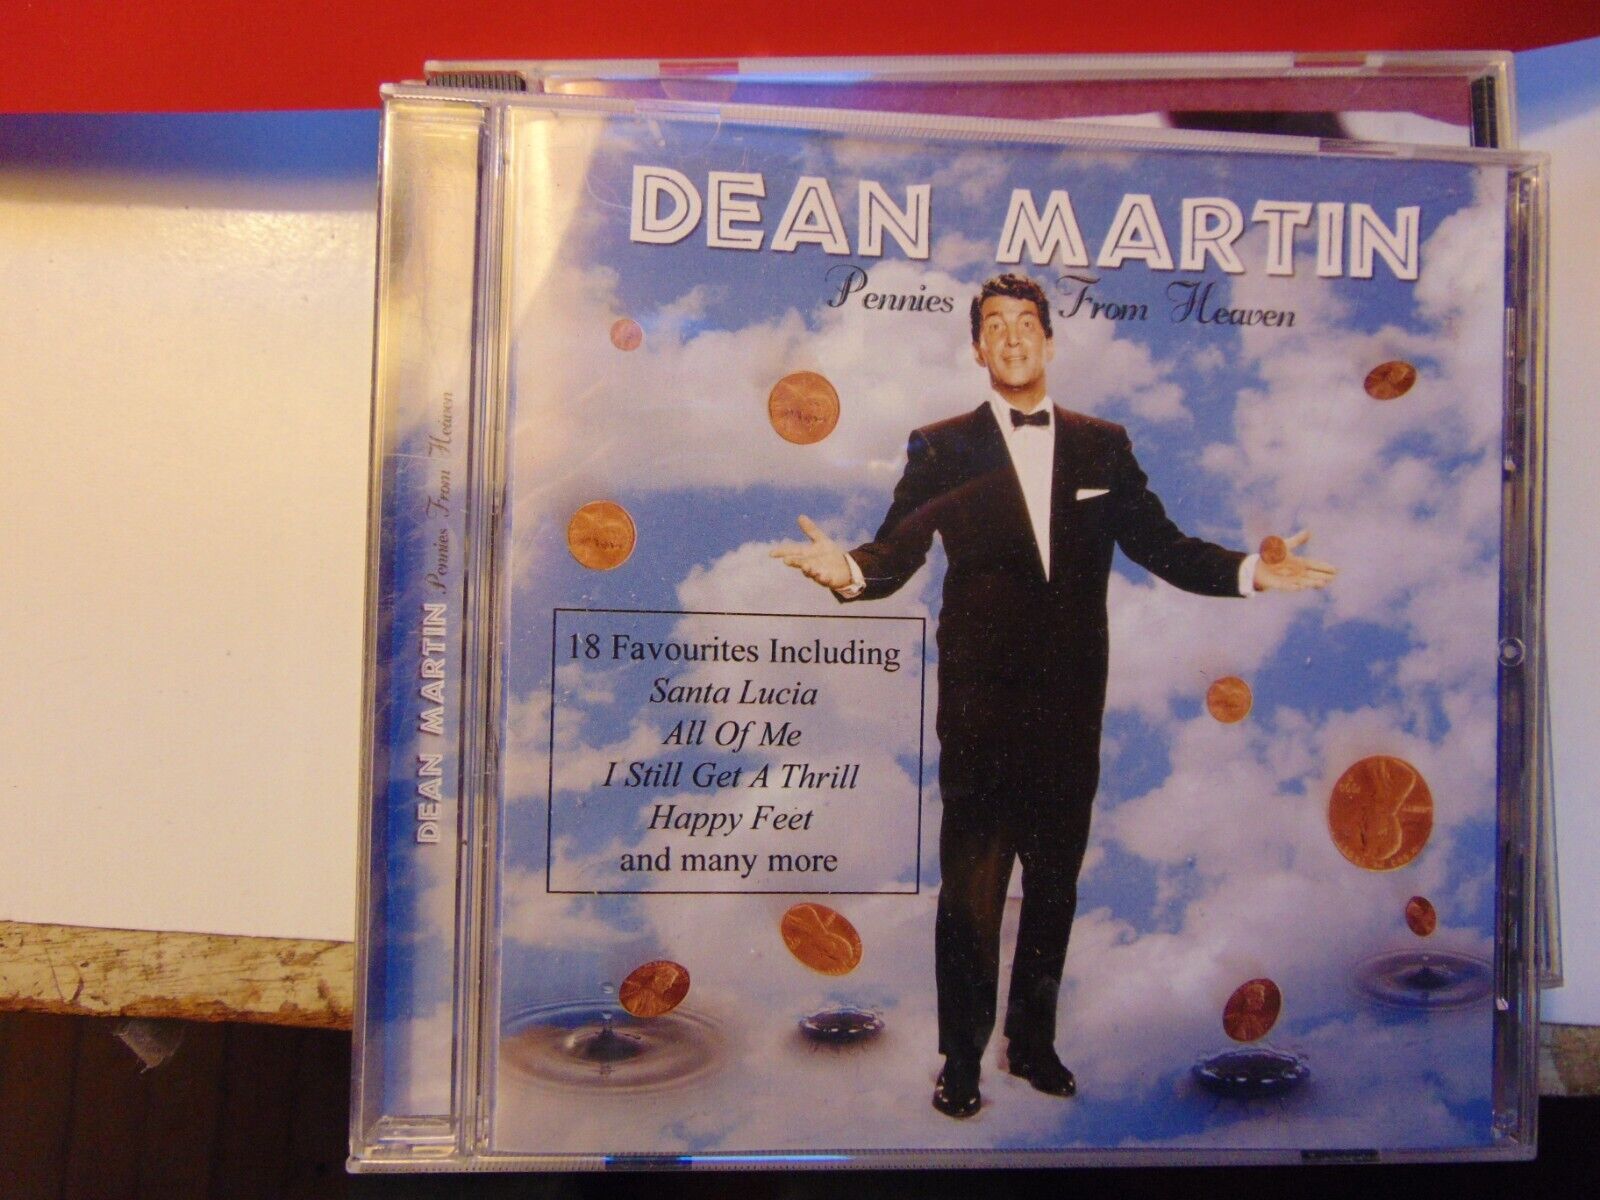 Dean Martin-Pennies from Heaven  (CD,-2002 Time Music)